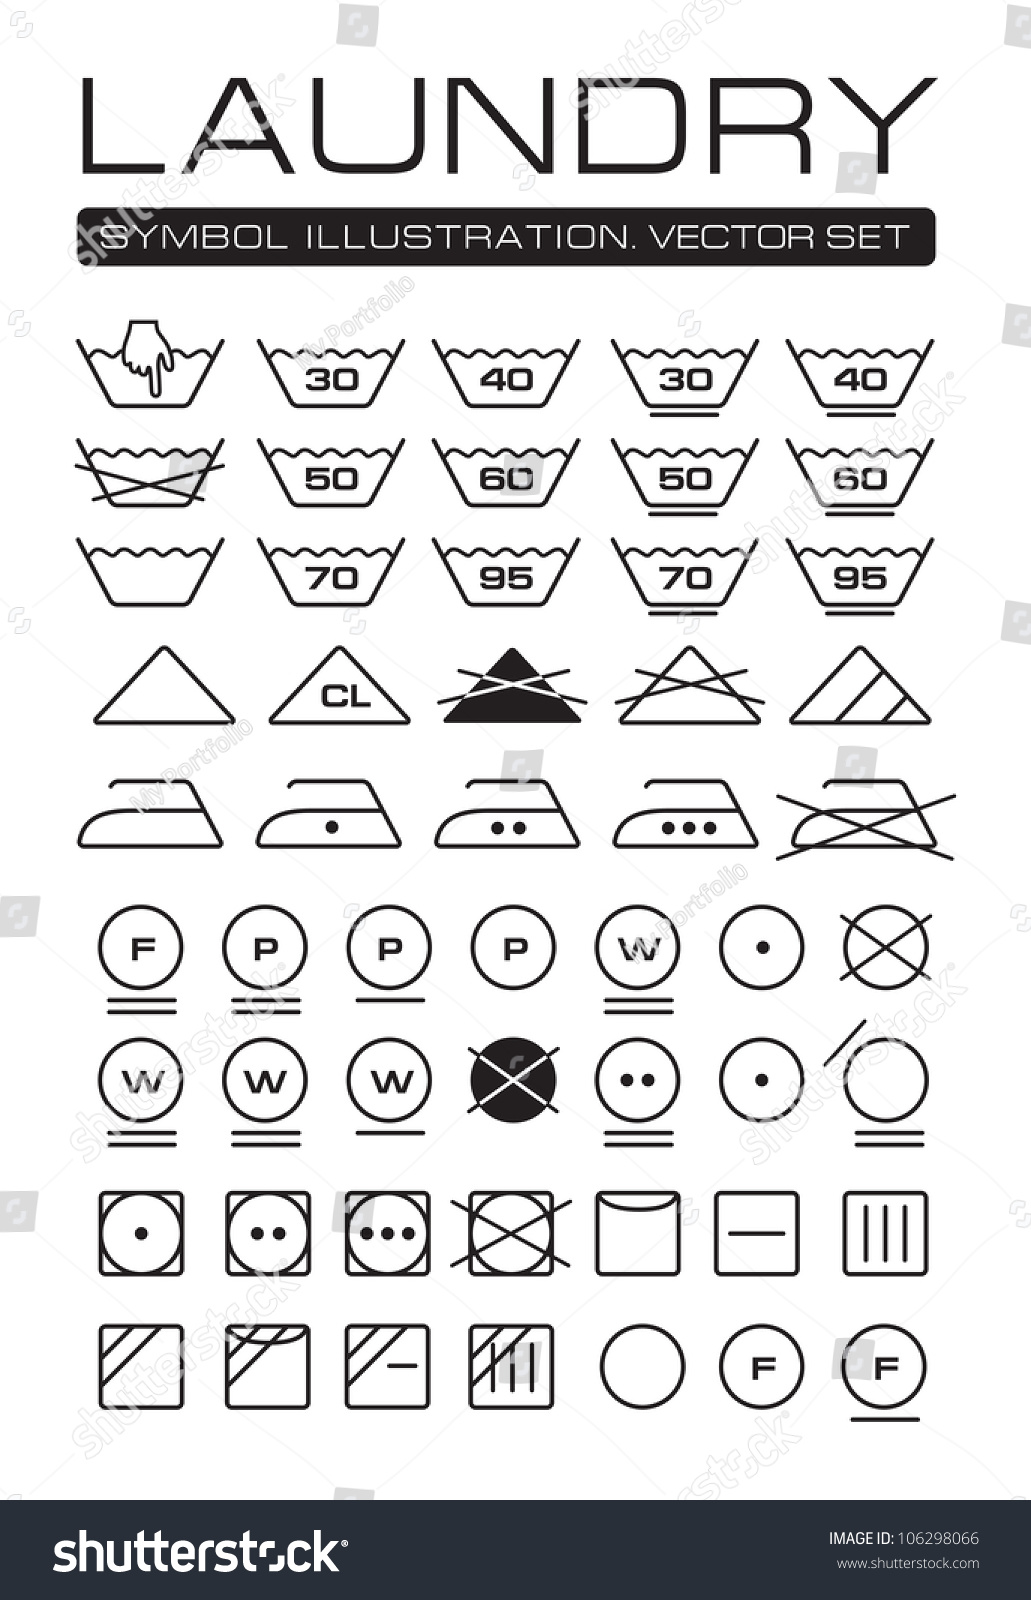 Laundry Symbols Collection Stock Vector Illustration 106298066 ...